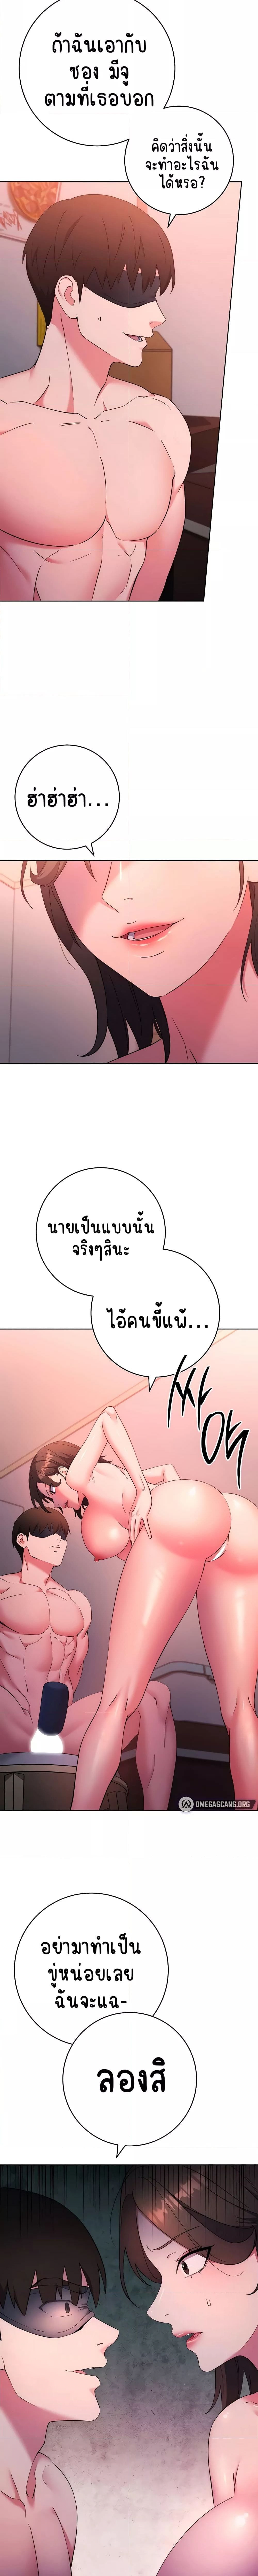 Outsider: The Invisible Man ตอนที่ 9 ภาพ 3